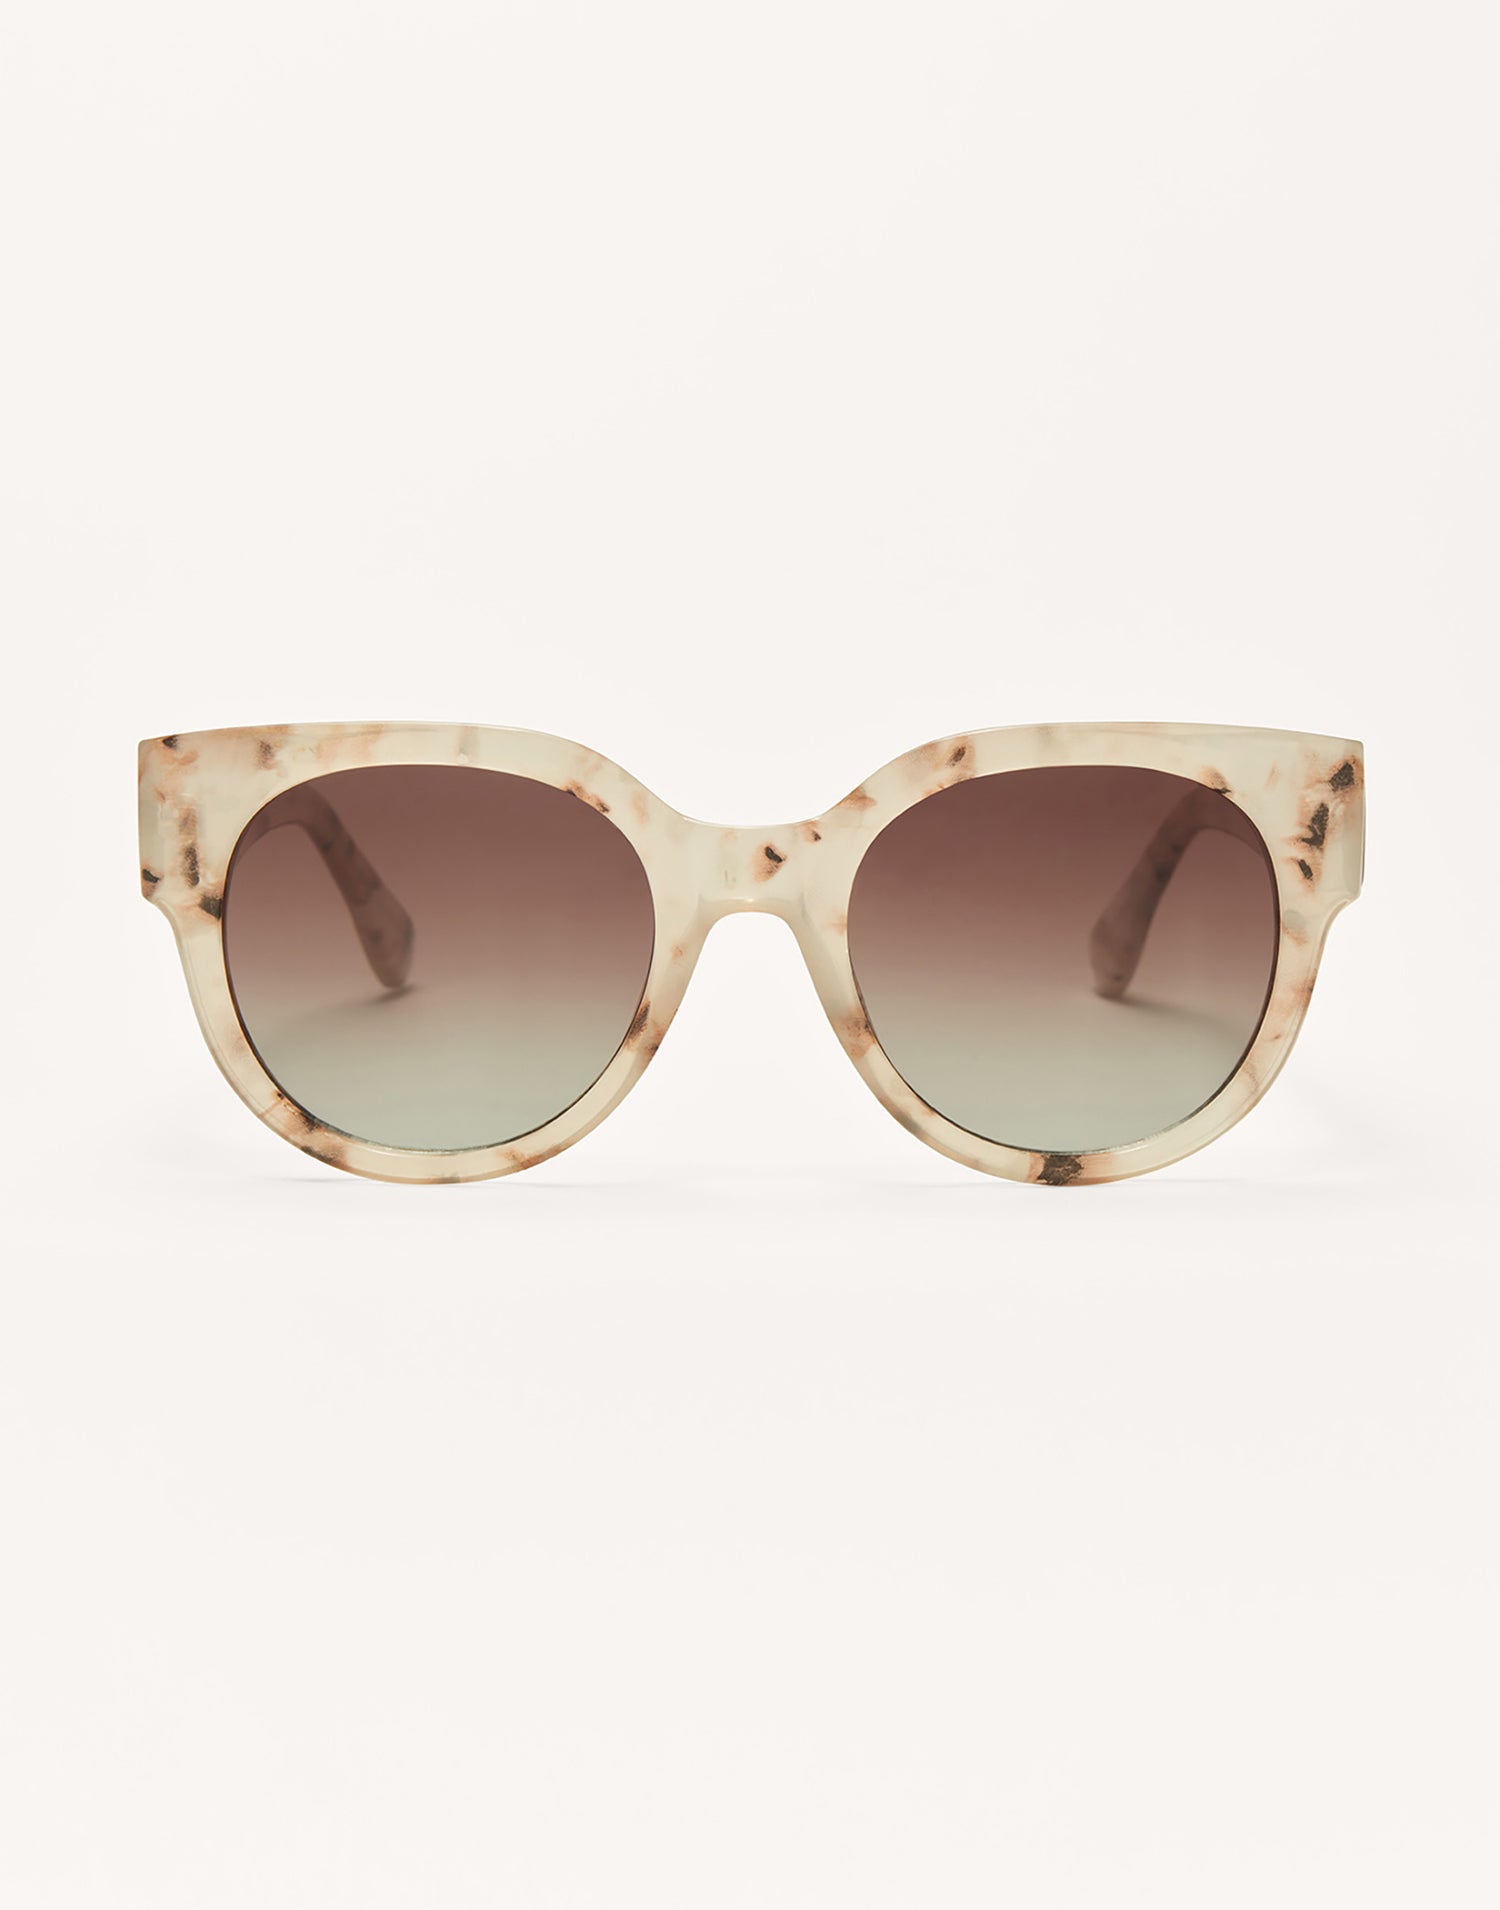 Lunch Date Sunglasses by Z Supply in Warm Sands - Front View